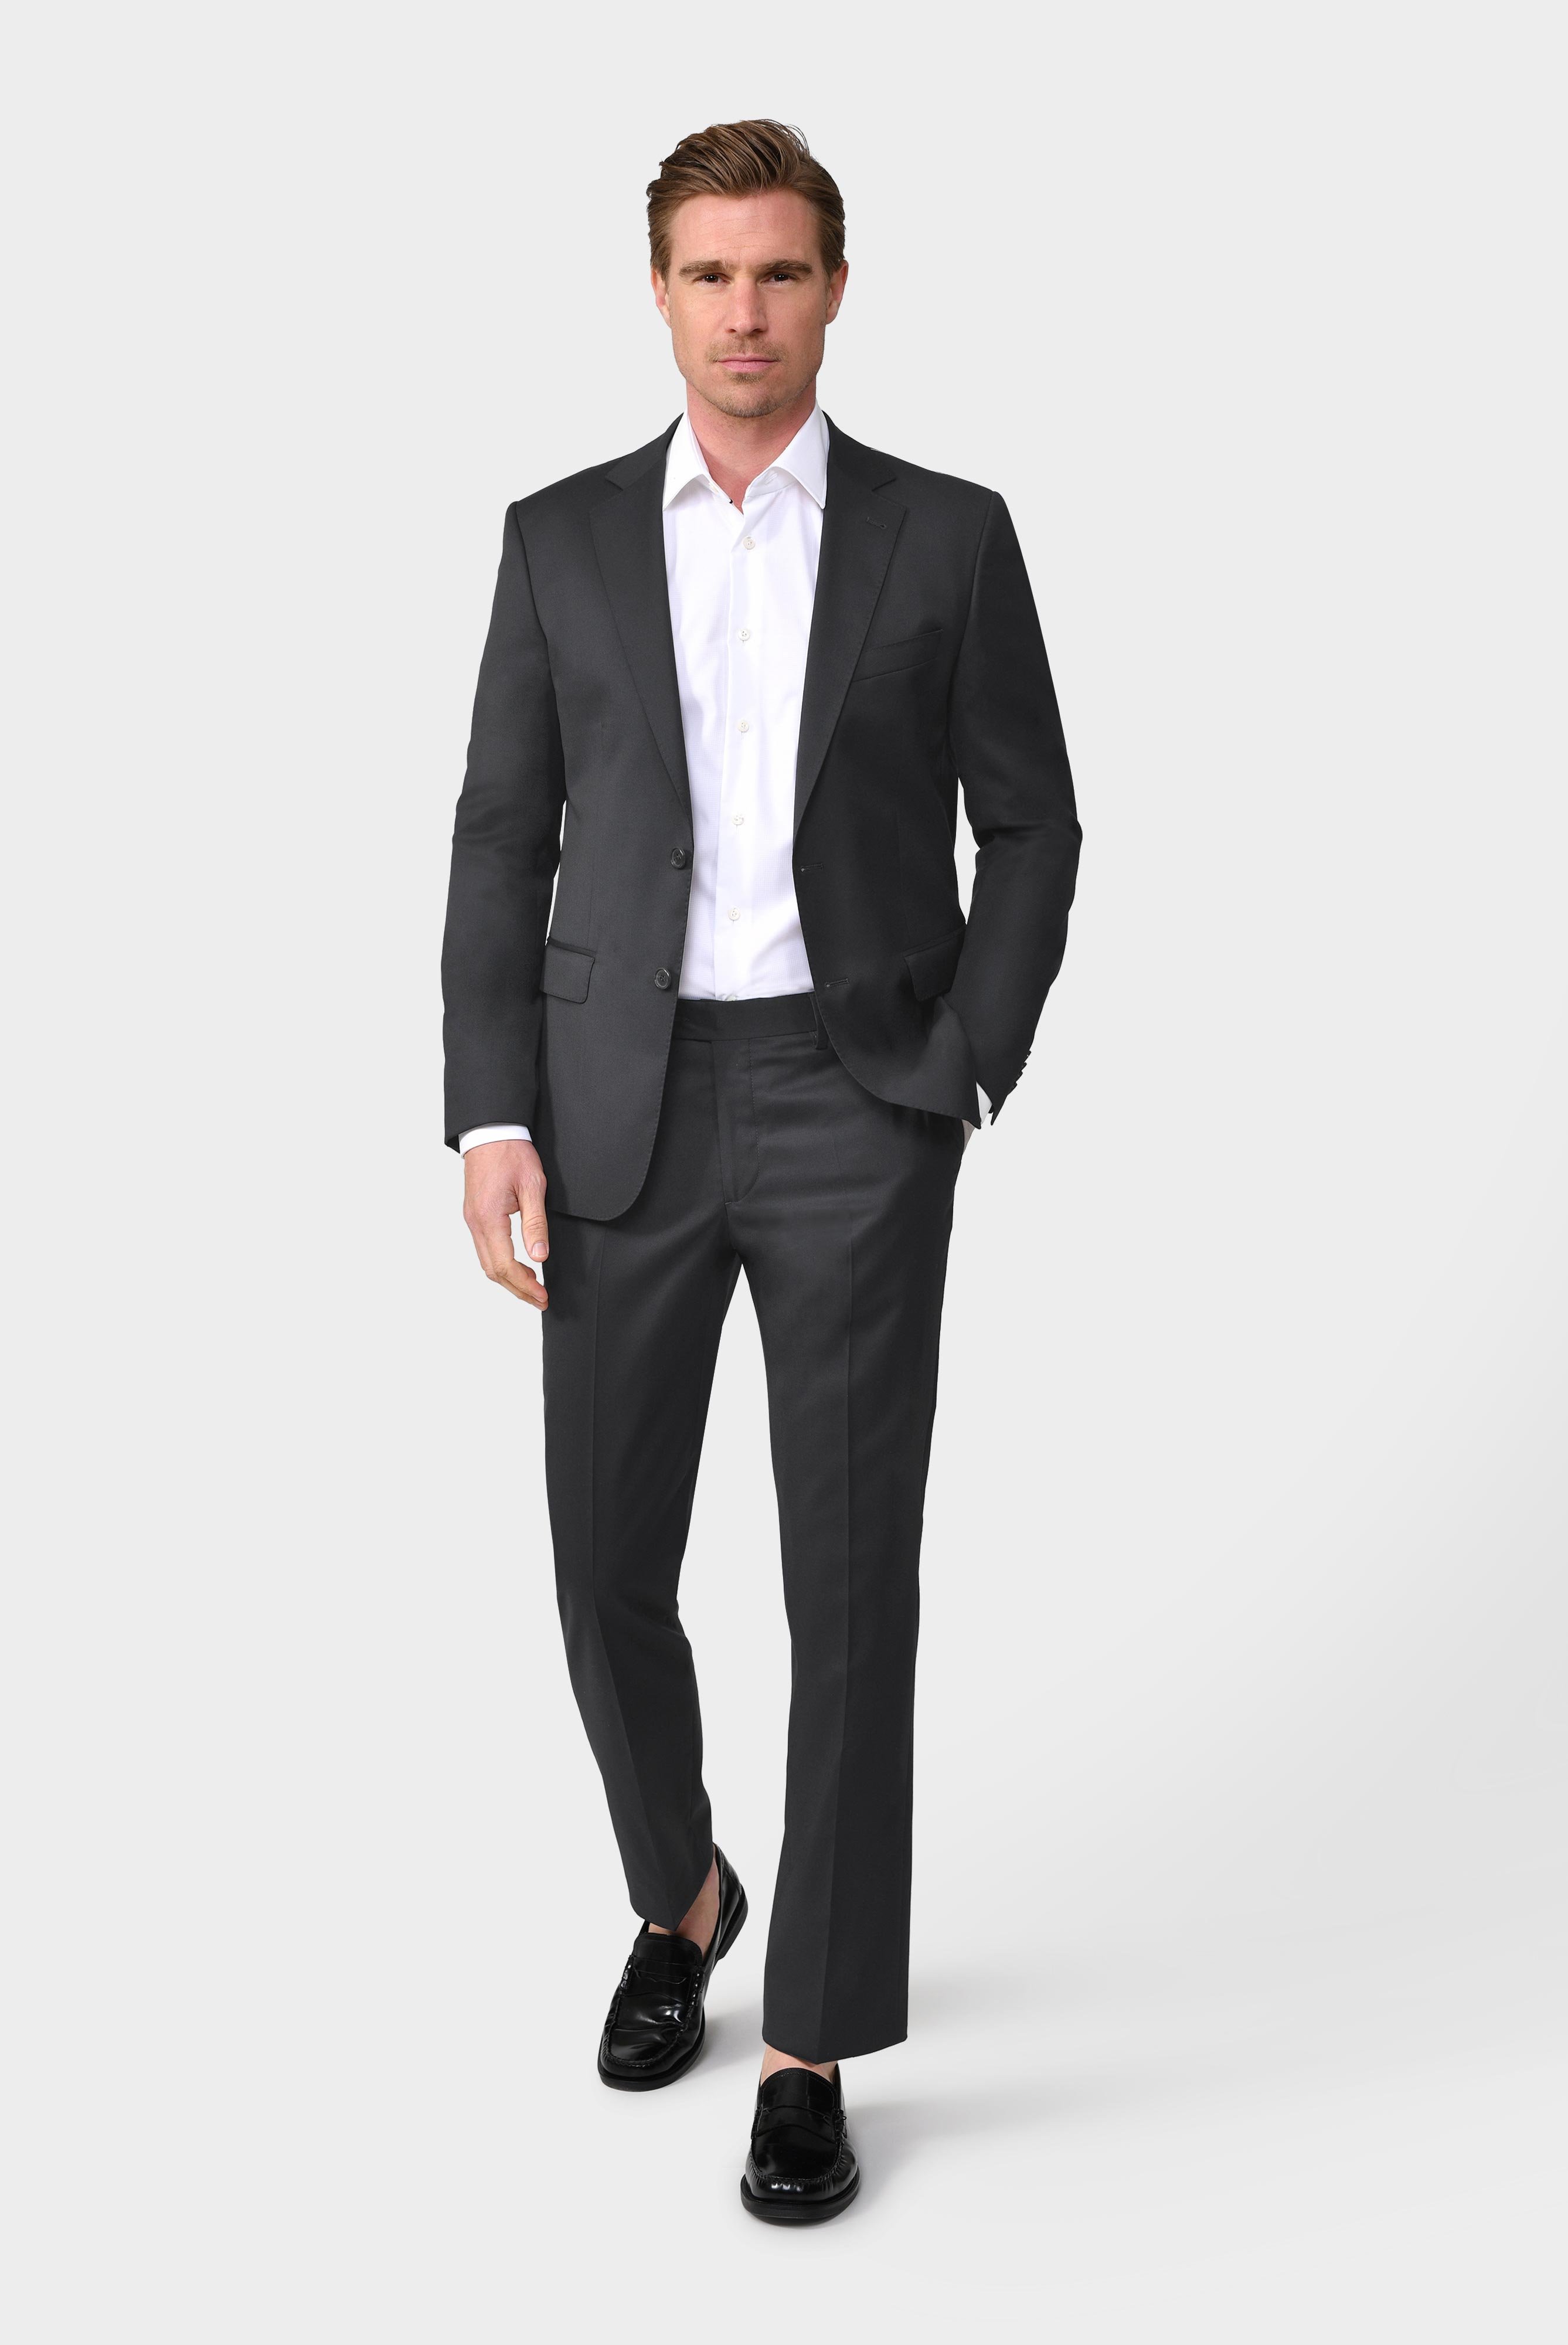 Jeans & Trousers+Men''s pants made of merino wool+80.7804.16.H01000.090.46